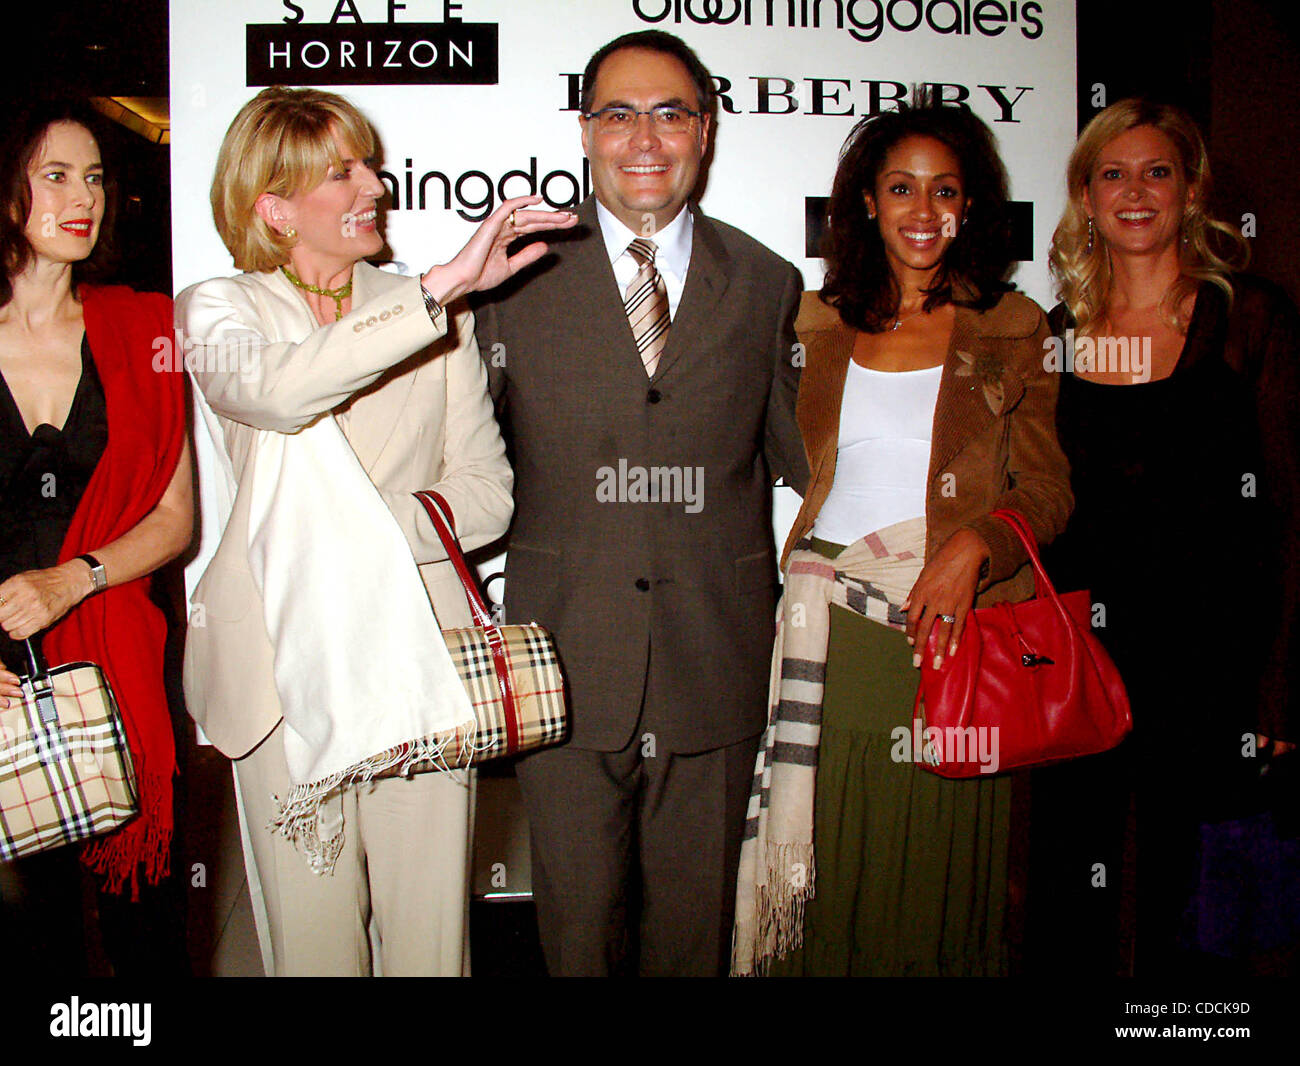 DAYLE HADDON, FELICIA TAYLOR, MALAAK COMPTON ROCK AND CYNTHIA LUFKIN.K32542ML.BLOOMINGDALE'S OPENS BURBERRY ACCESSORY SHOP WITH OPENING RECEPTION TO BENEFIT SAFE HORIZON AT BLOOMINGDALE'S IN NEW YORK New York.9/4/2003.  /    2003(Credit Image: Â© Mitchell Levy/Globe Photos/ZUMAPRESS.com) Stock Photo